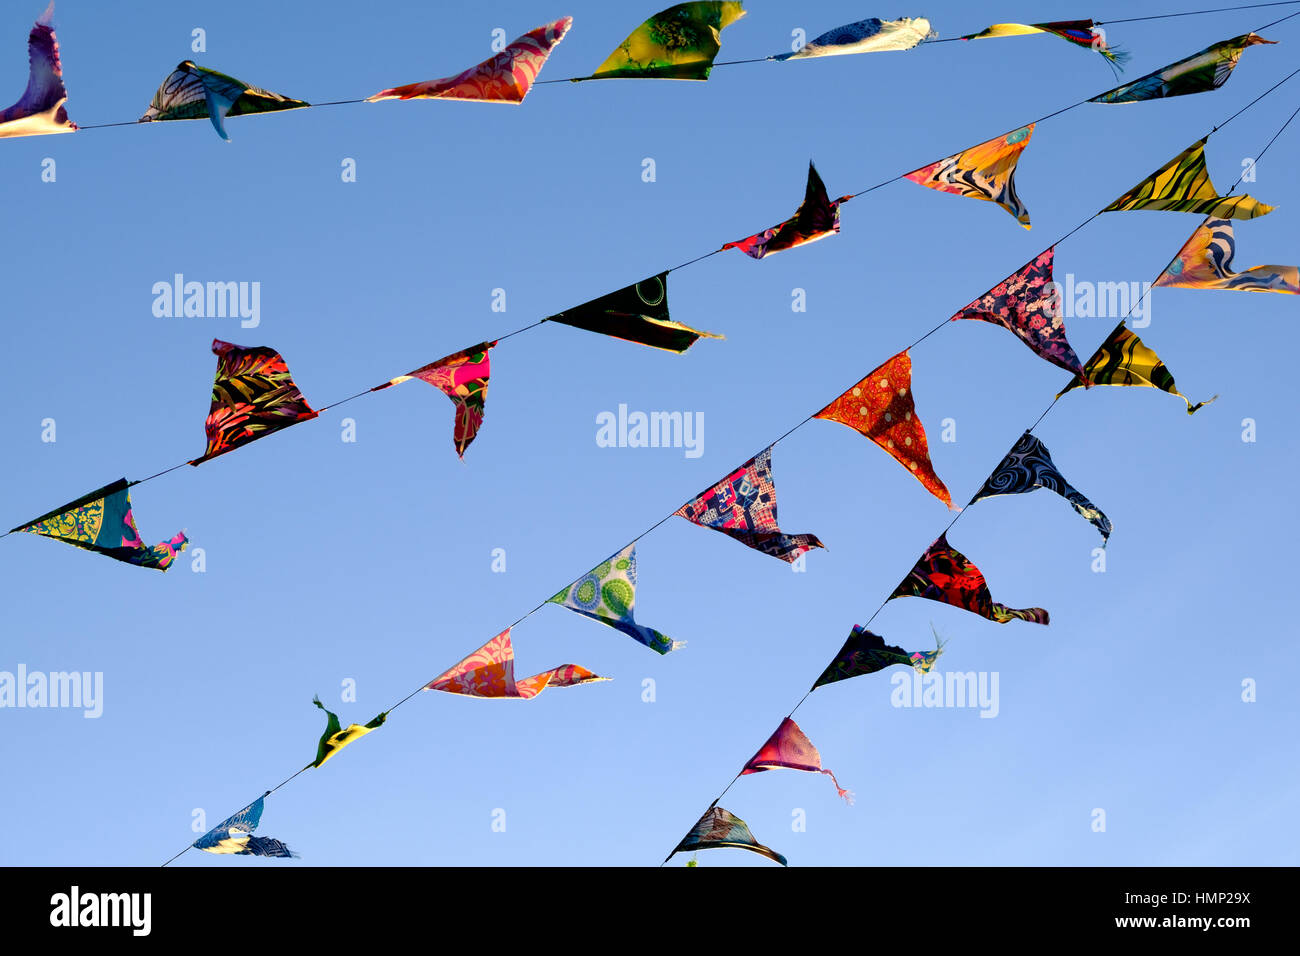 Flags and bunting against a blue sky in late afternoon Stock Photo